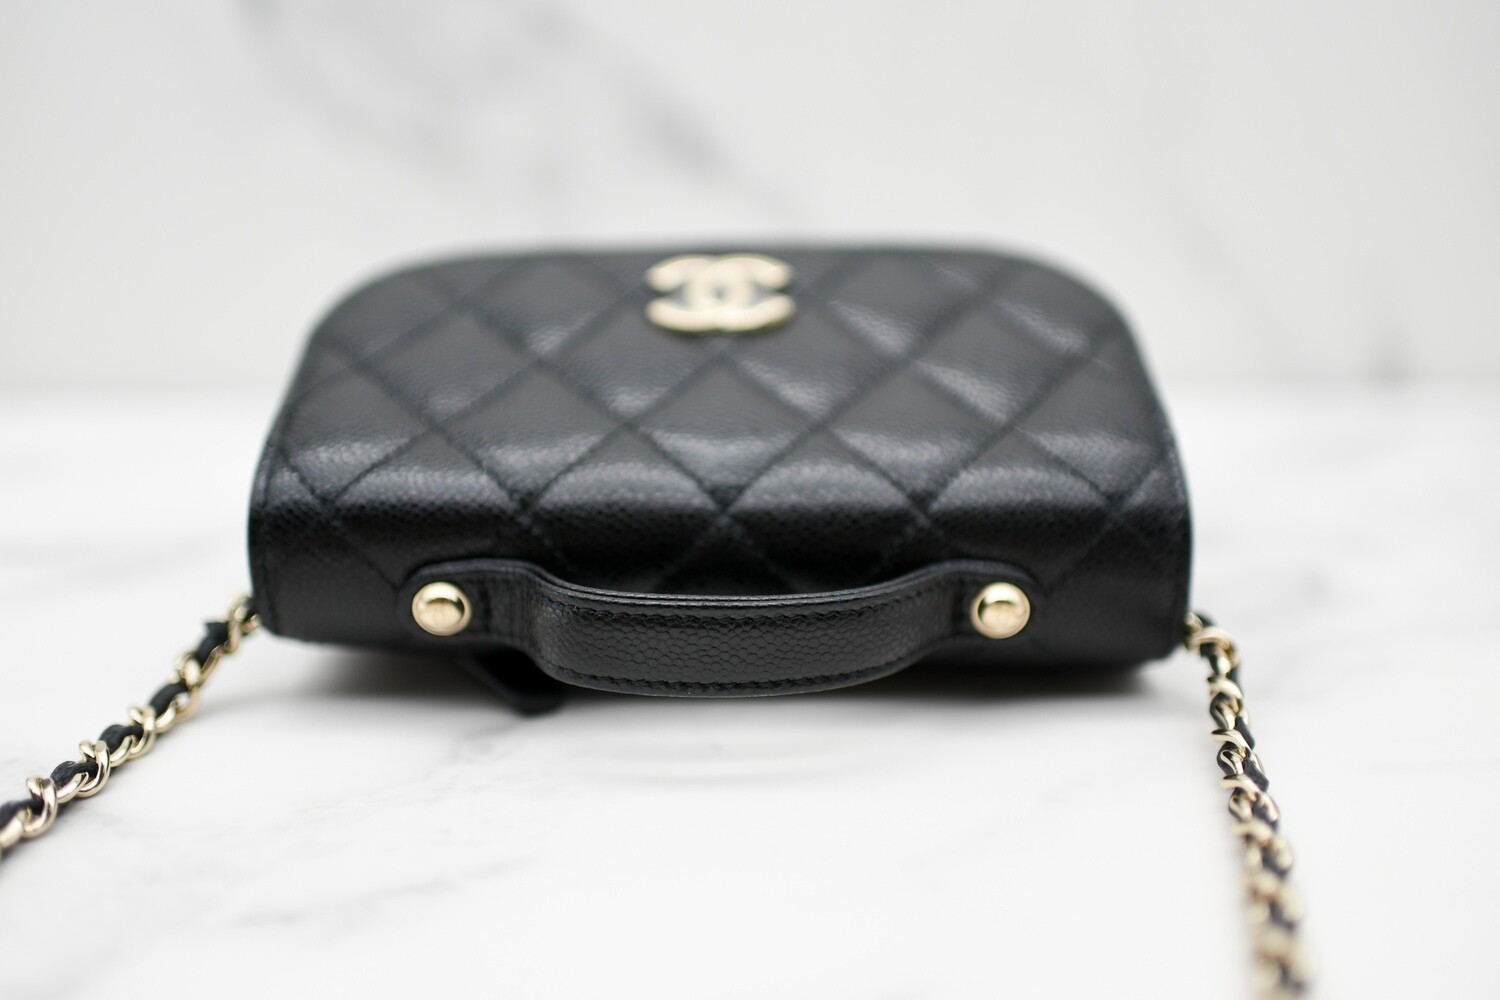 Chanel Business Affinity Clutch with Chain Flap, Black Caviar